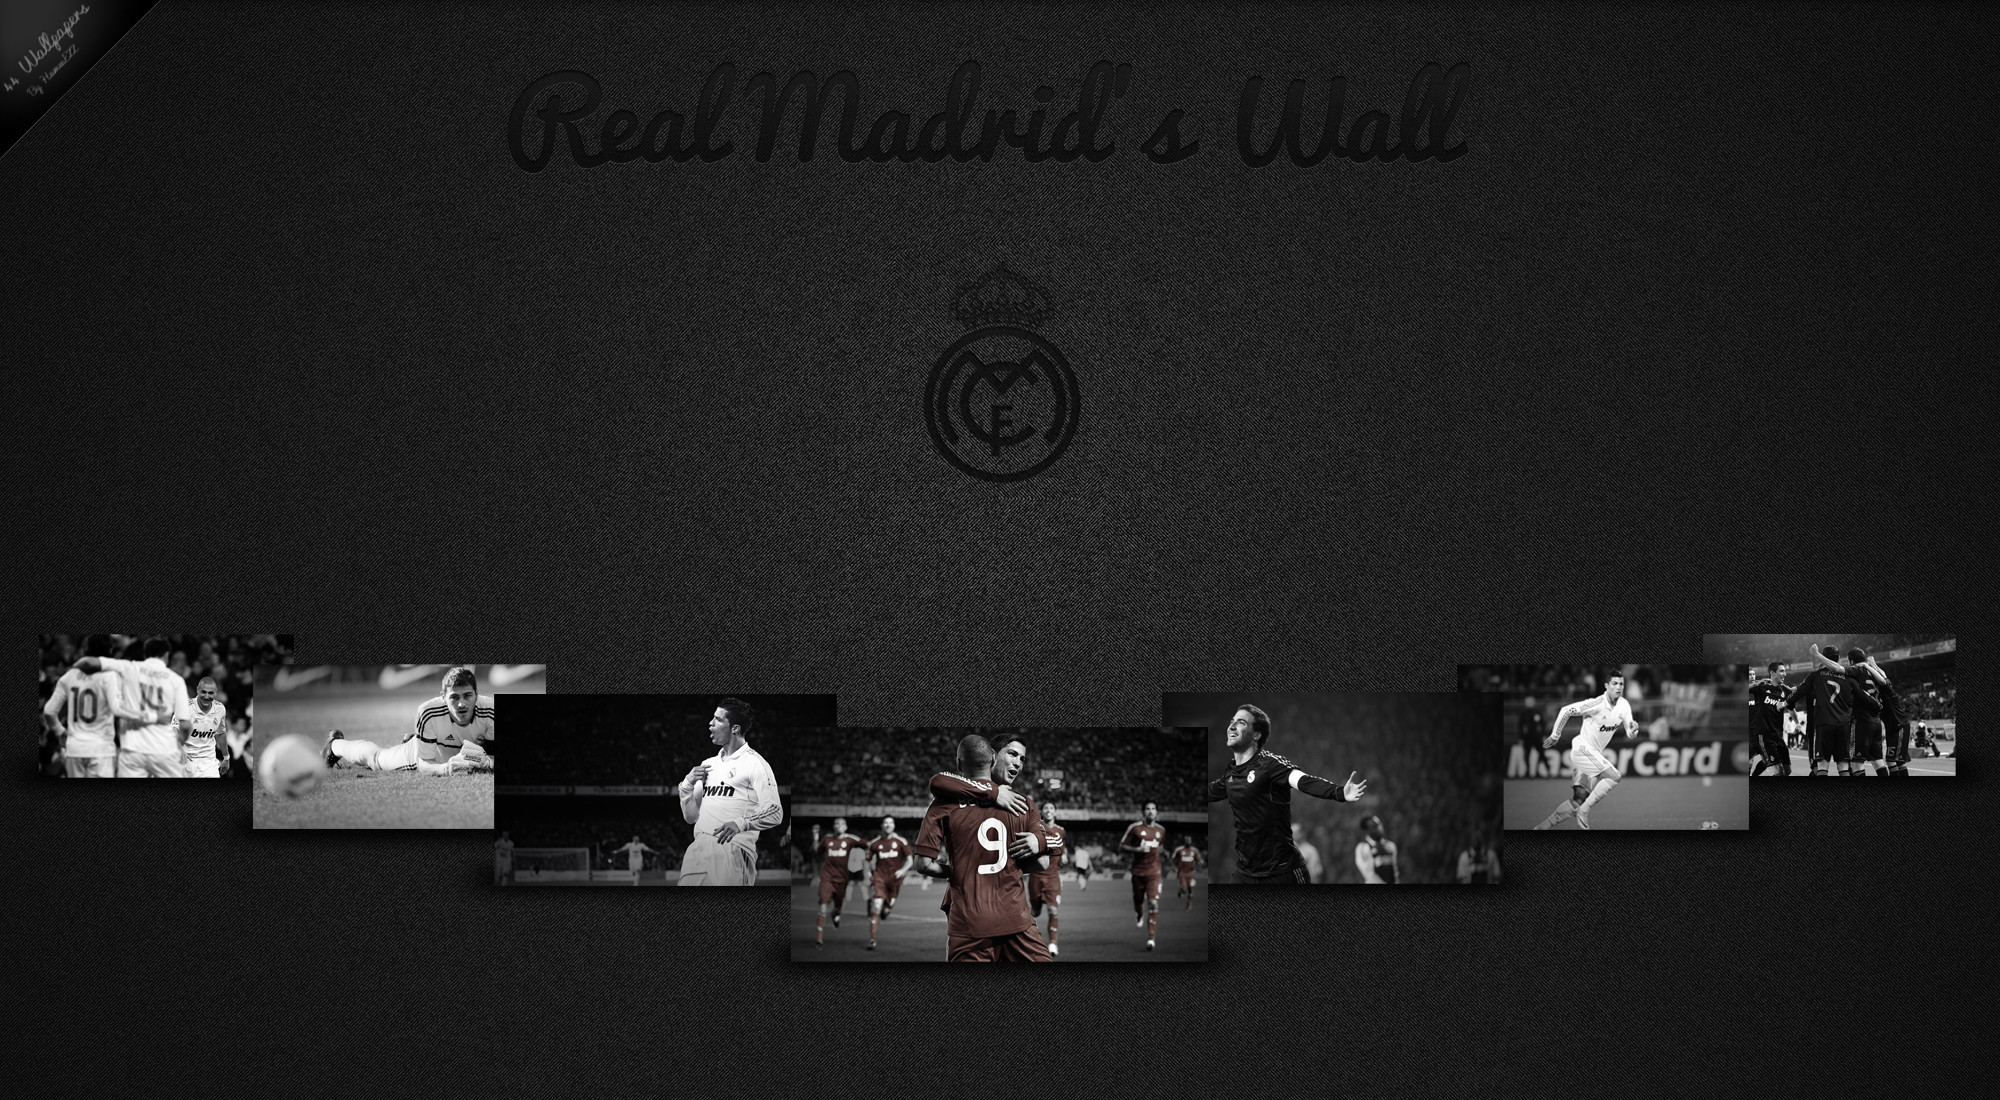 2000x1100 Real madrid's wallpapers by HamzaEzz Real madrid's wallpapers by HamzaEzz